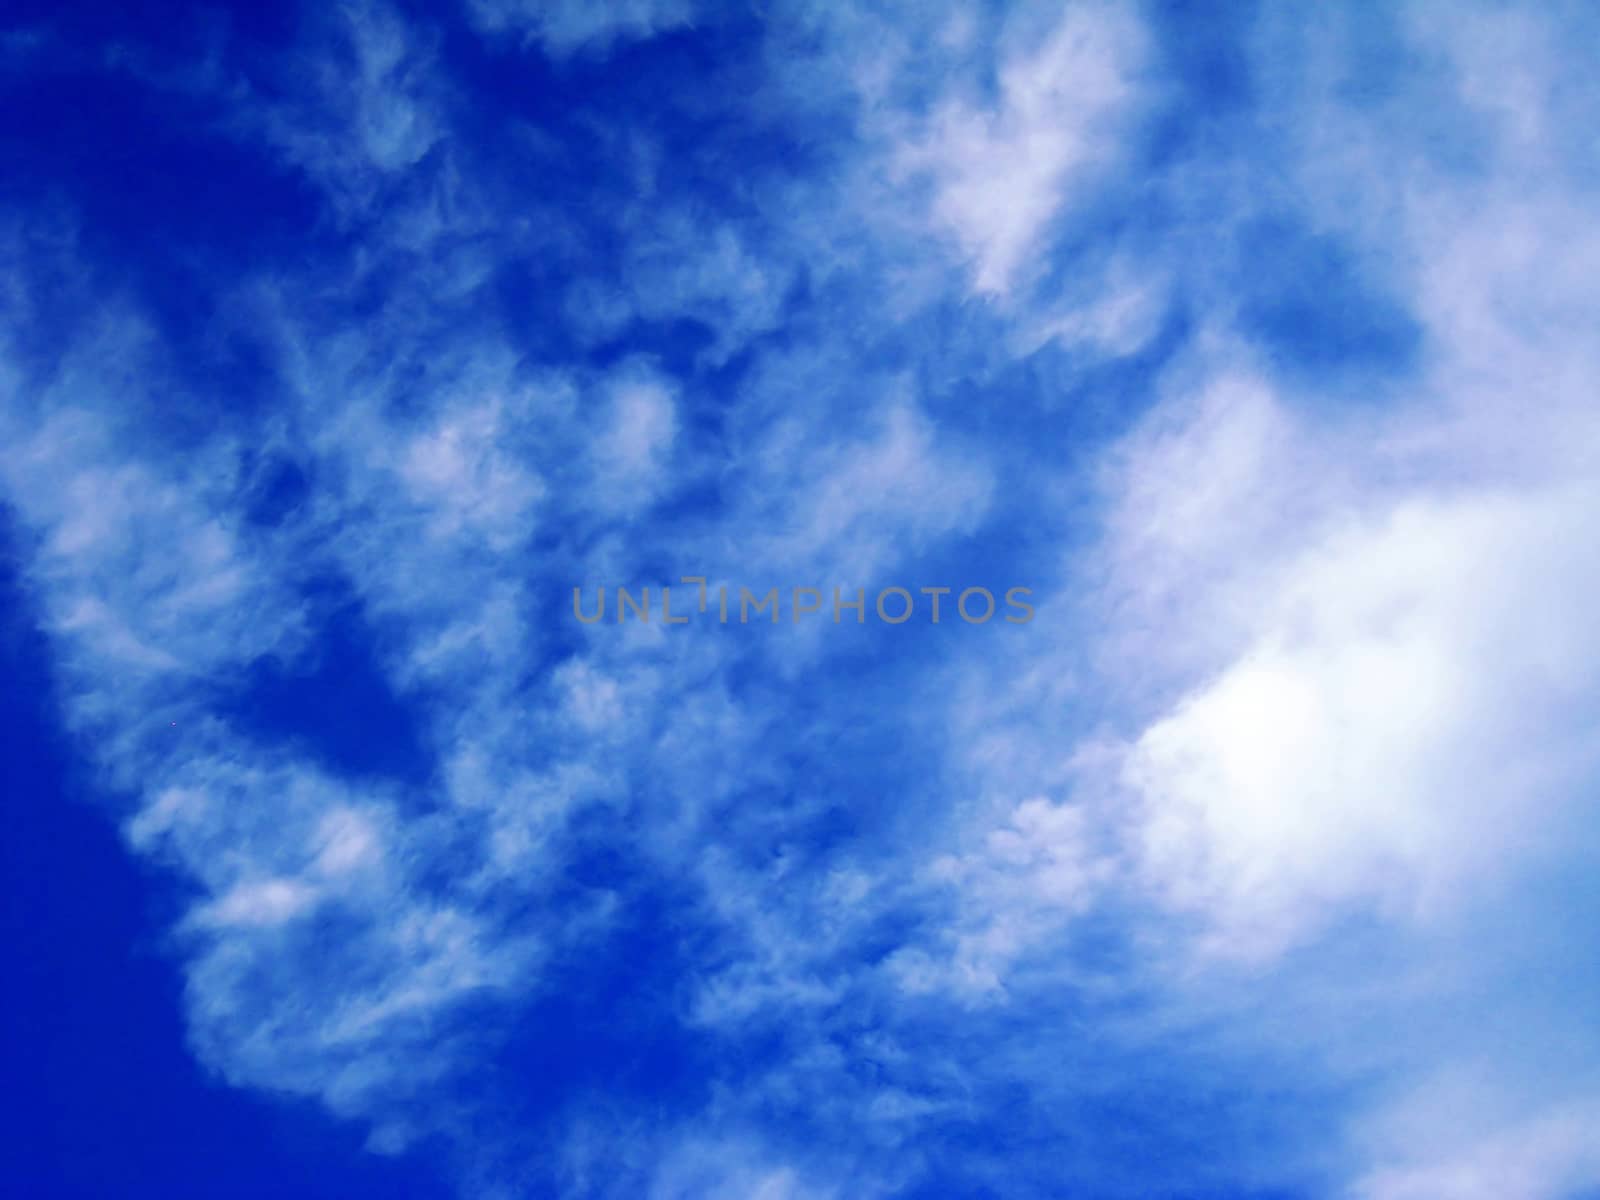 The blue sky by dinhngochung